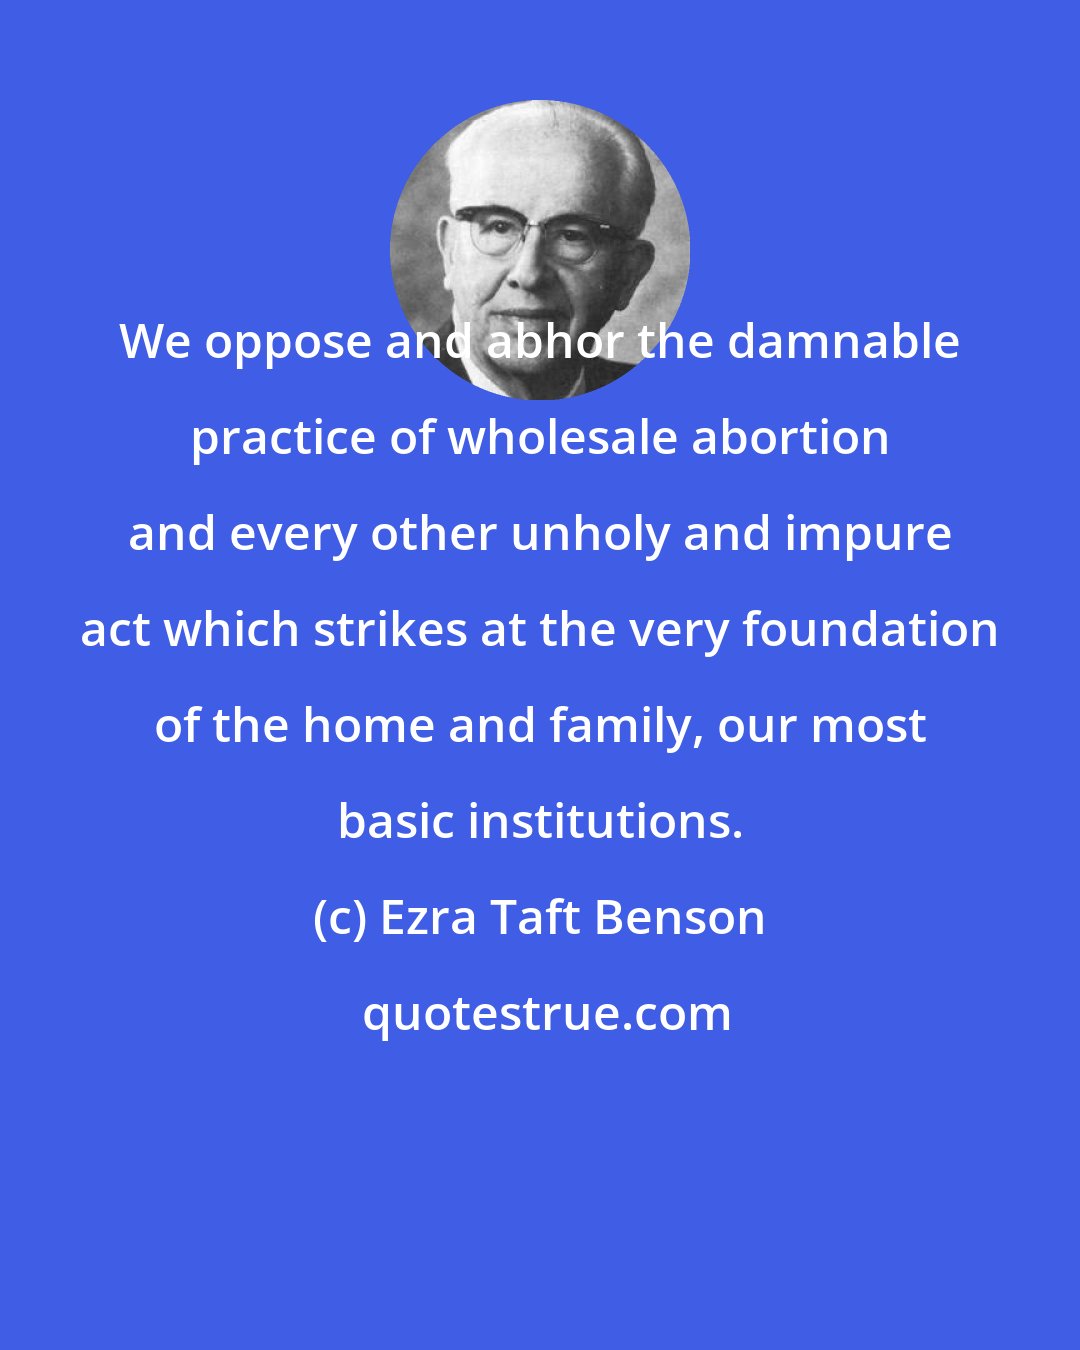 Ezra Taft Benson: We oppose and abhor the damnable practice of wholesale abortion and every other unholy and impure act which strikes at the very foundation of the home and family, our most basic institutions.